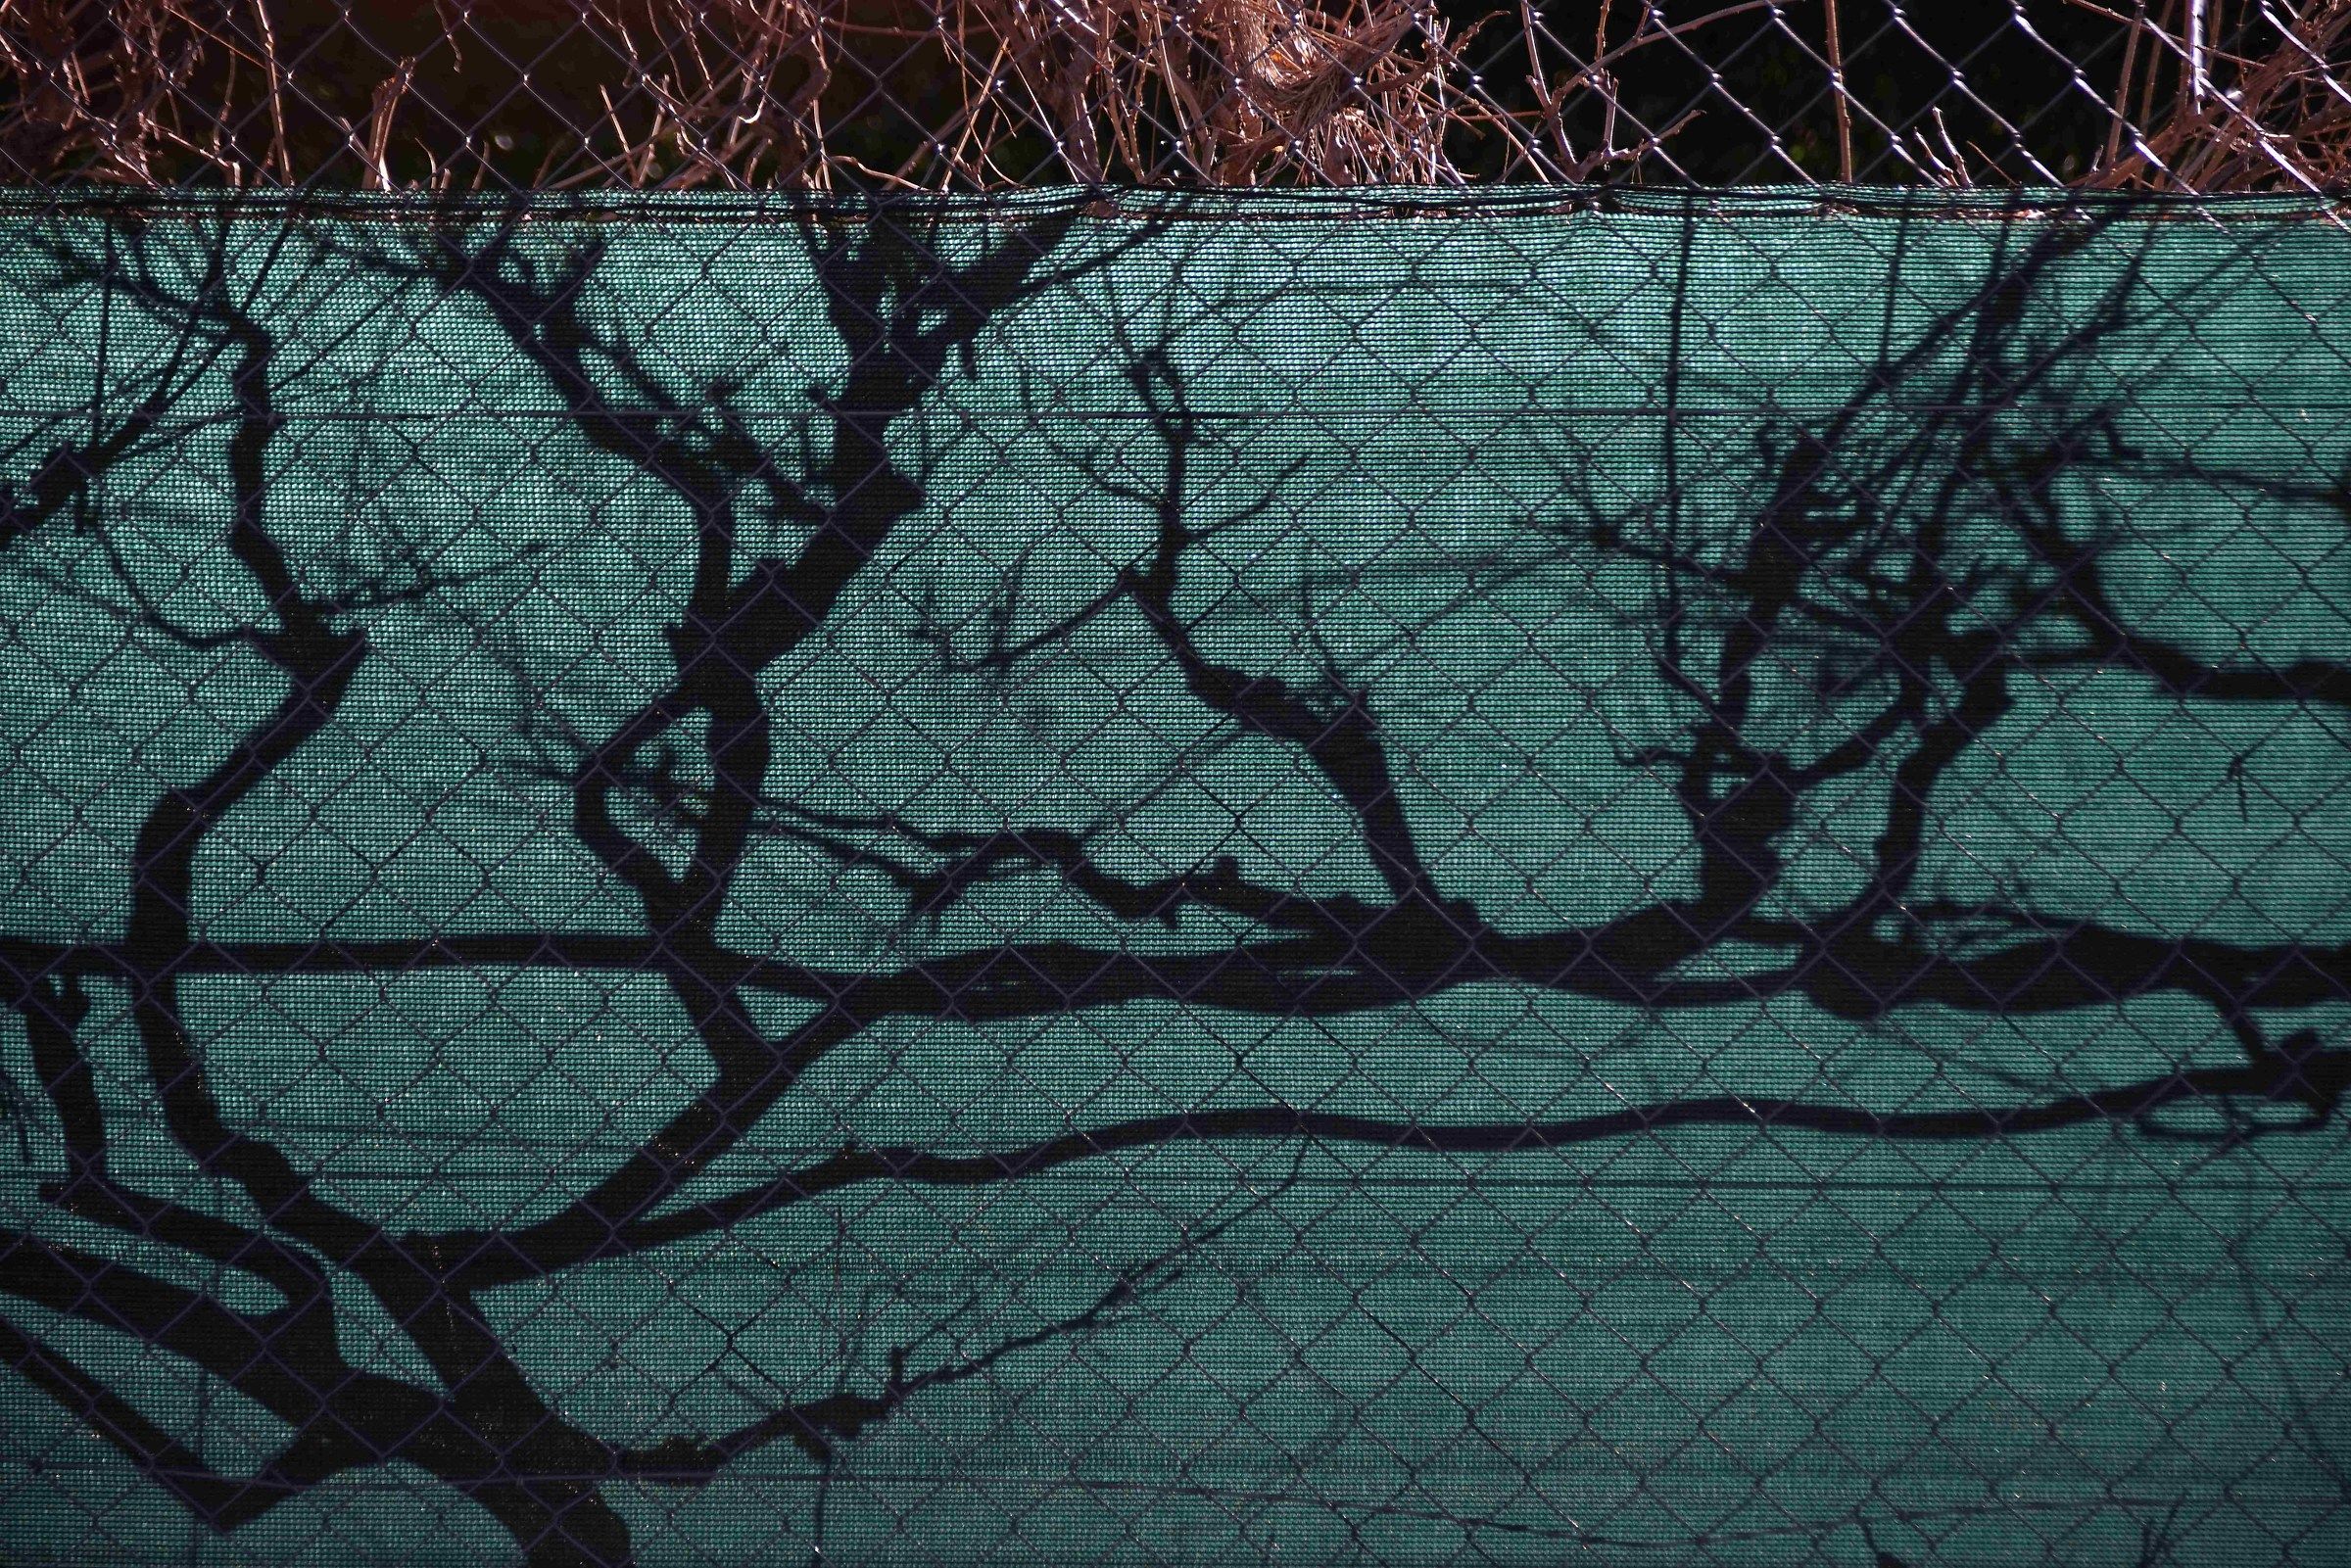 Shadows in the nets...